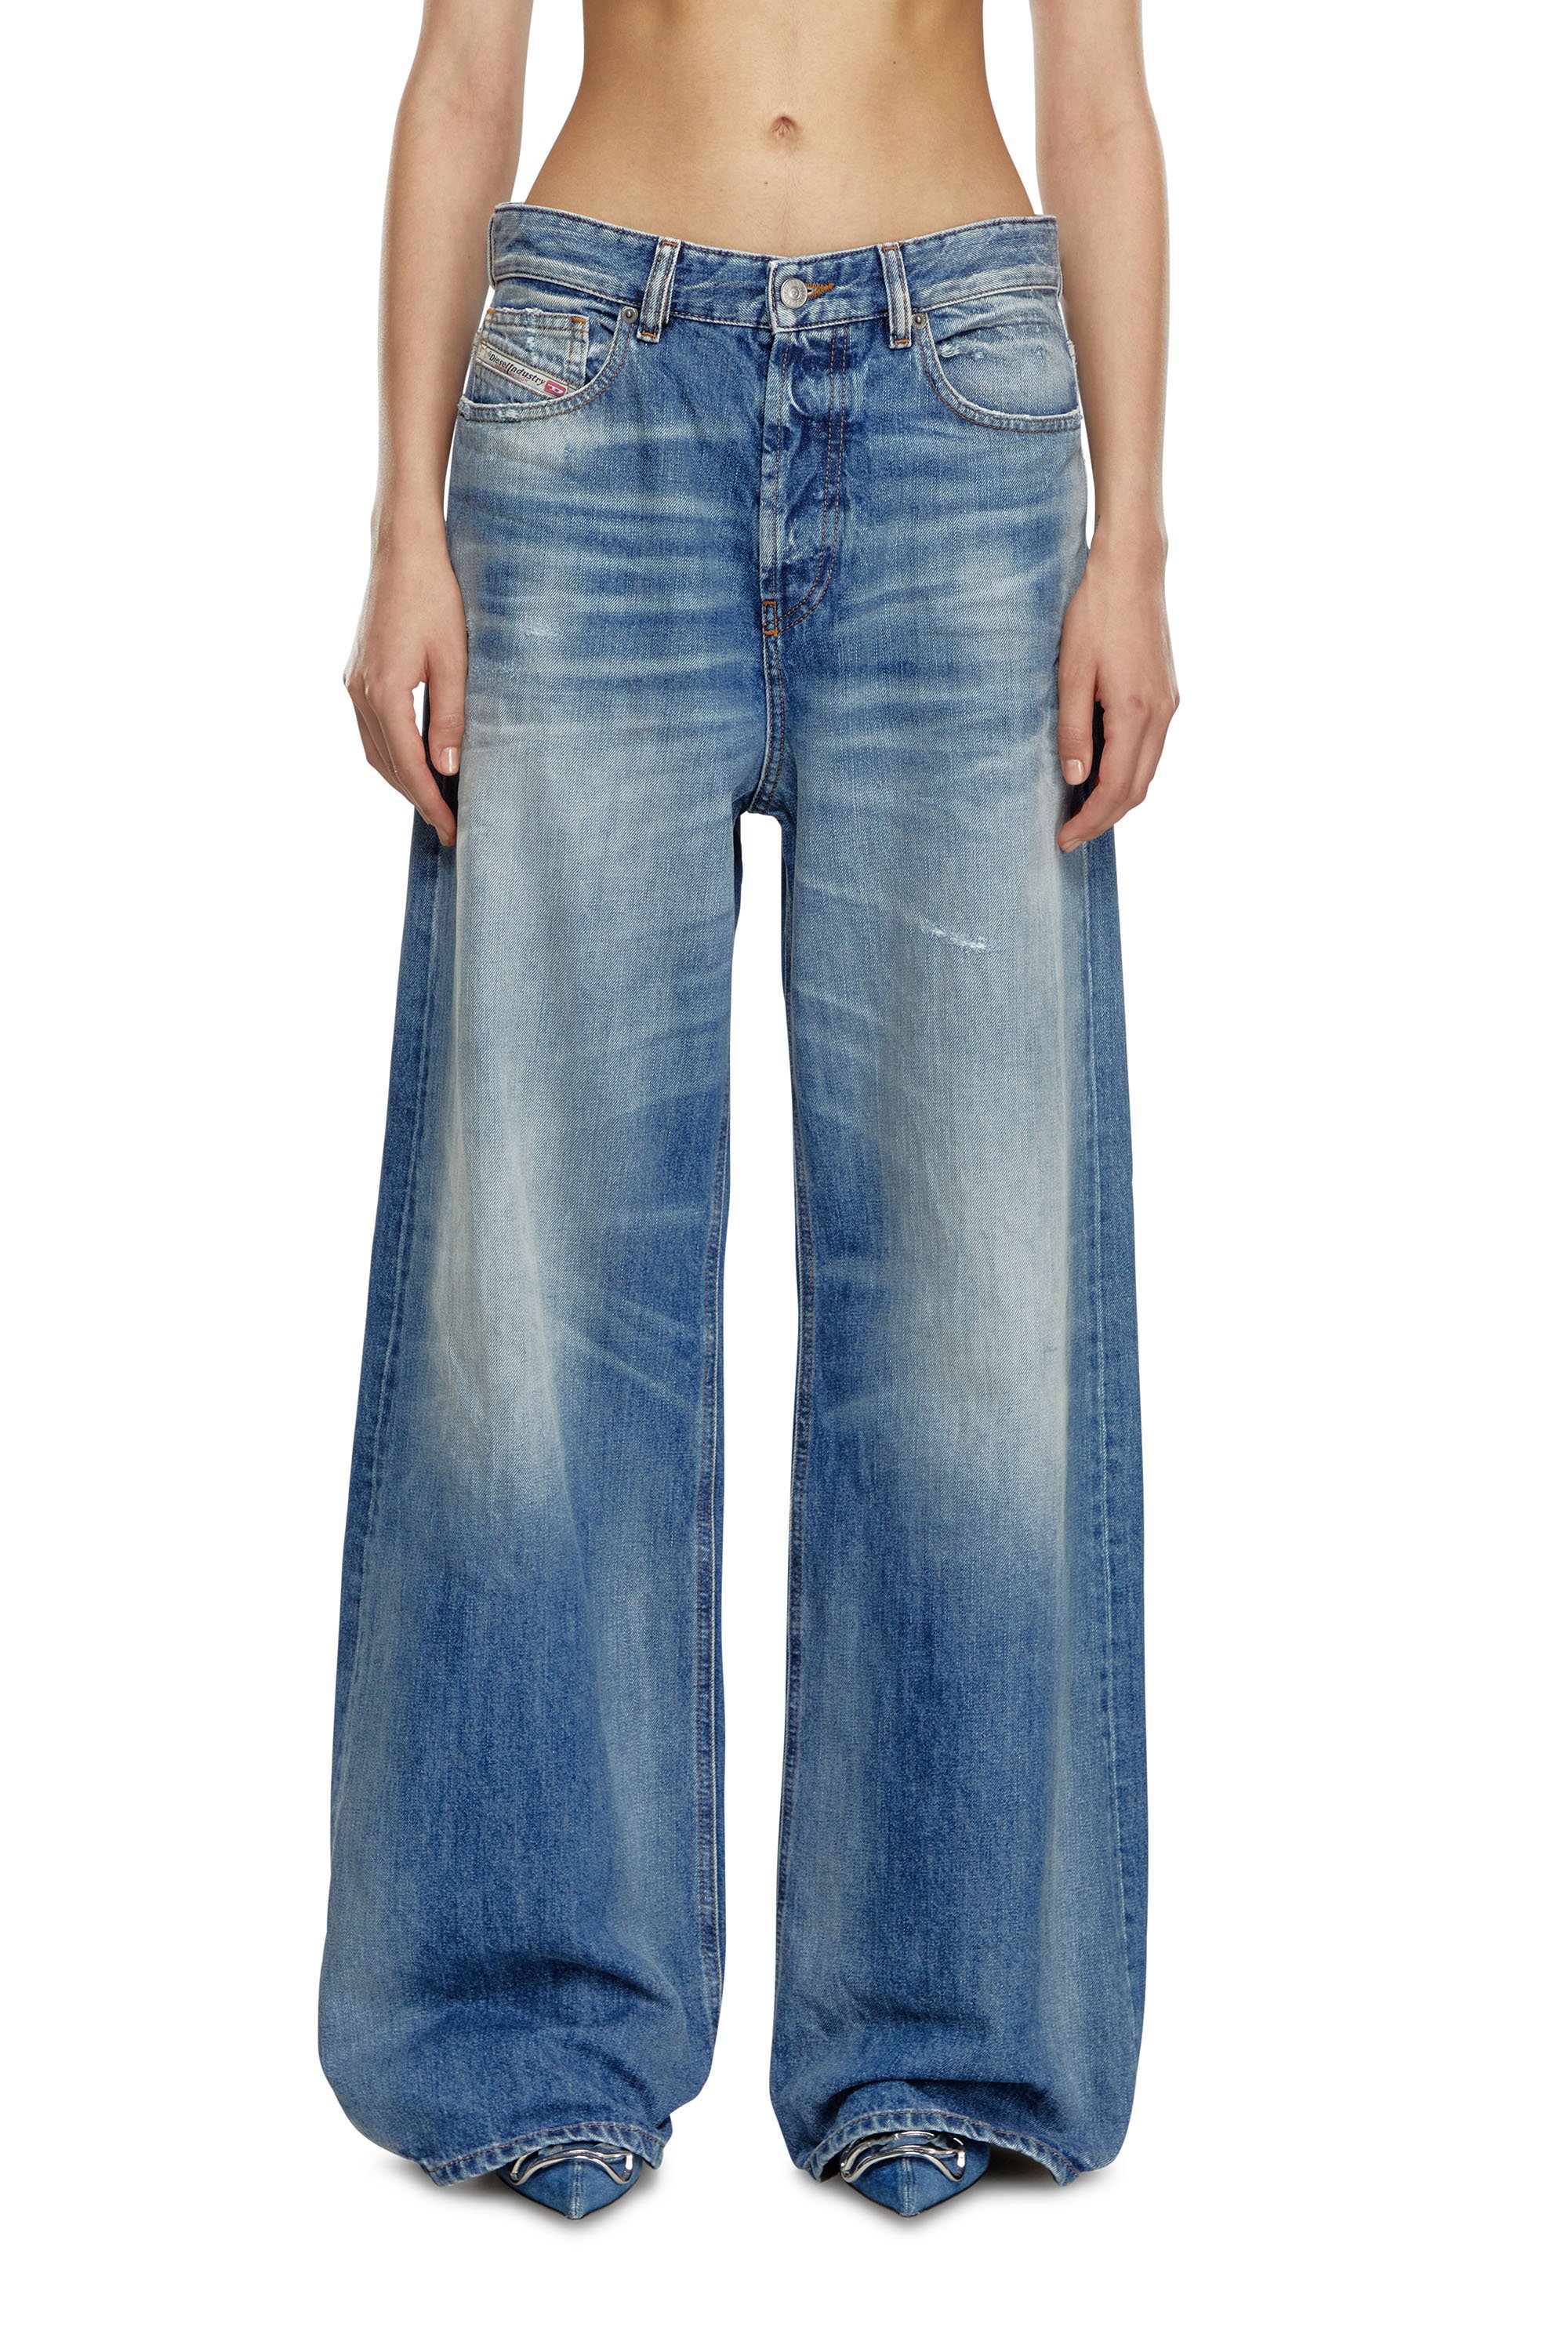 Diesel - Straight Jeans 1996 D-Sire 09J86, Mujer Straight Jeans - 1996 D-Sire in Azul marino - Image 2